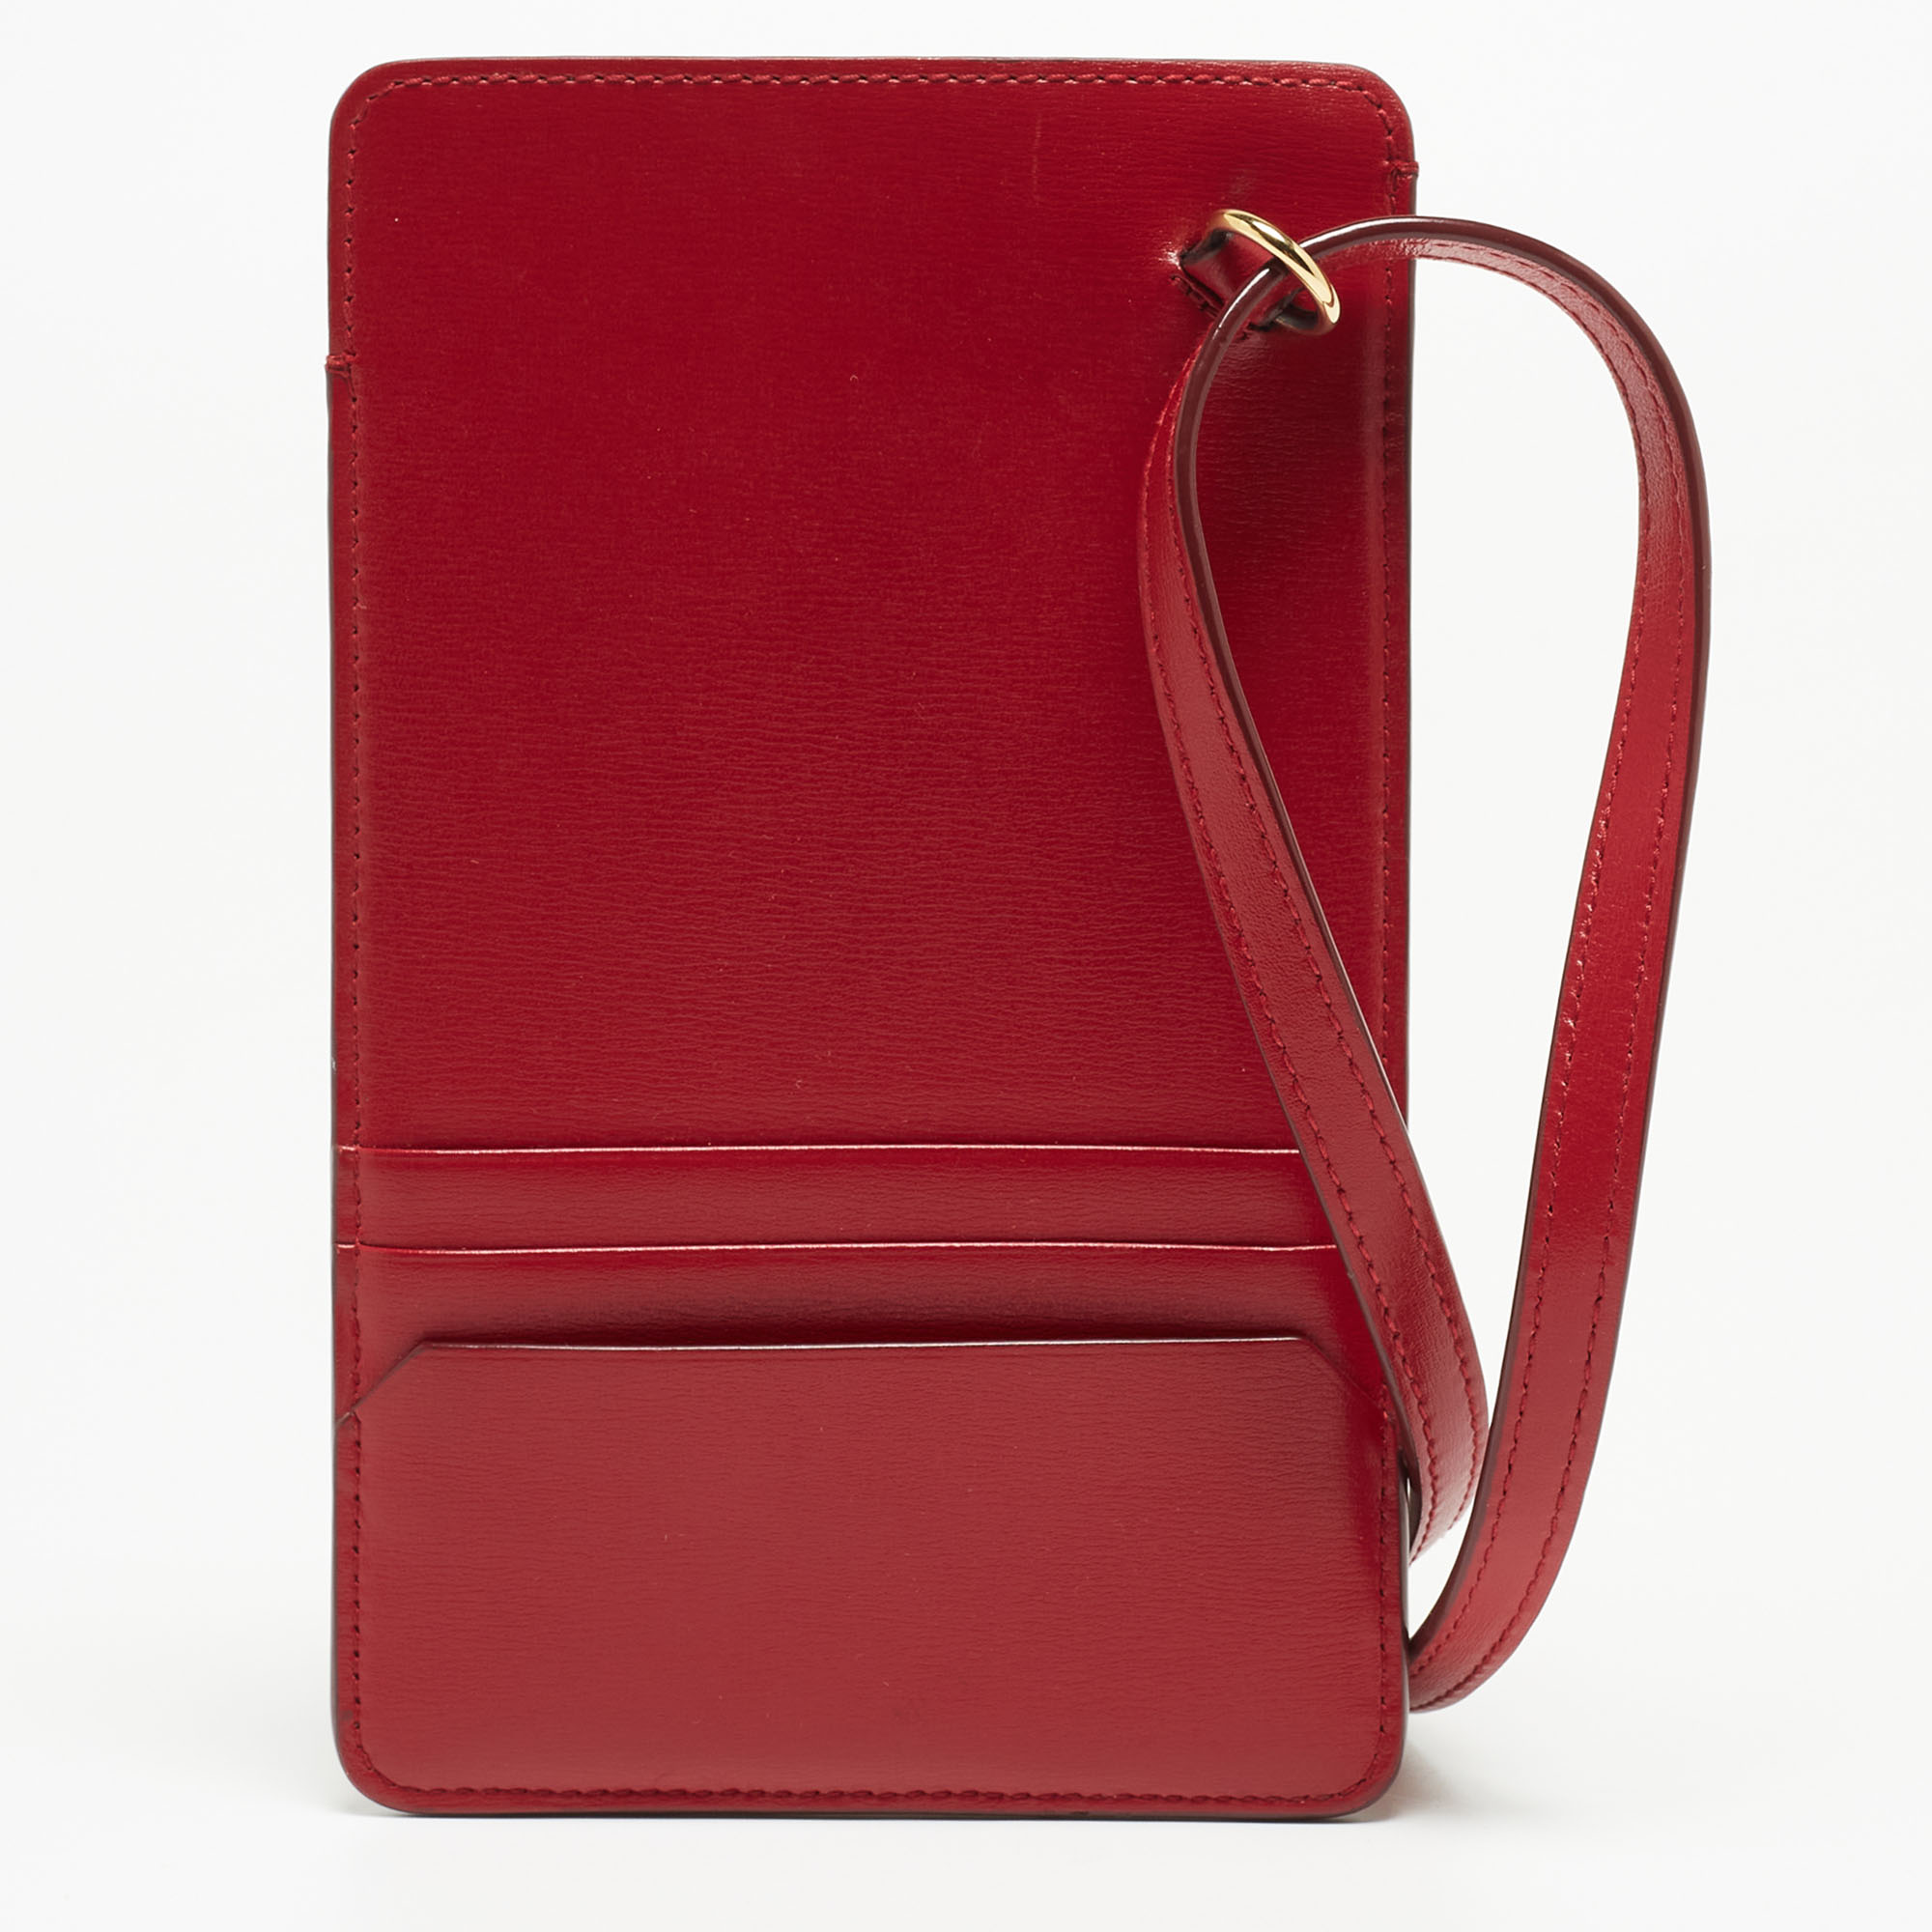 Bally Red Leather Document Crossbody Bag